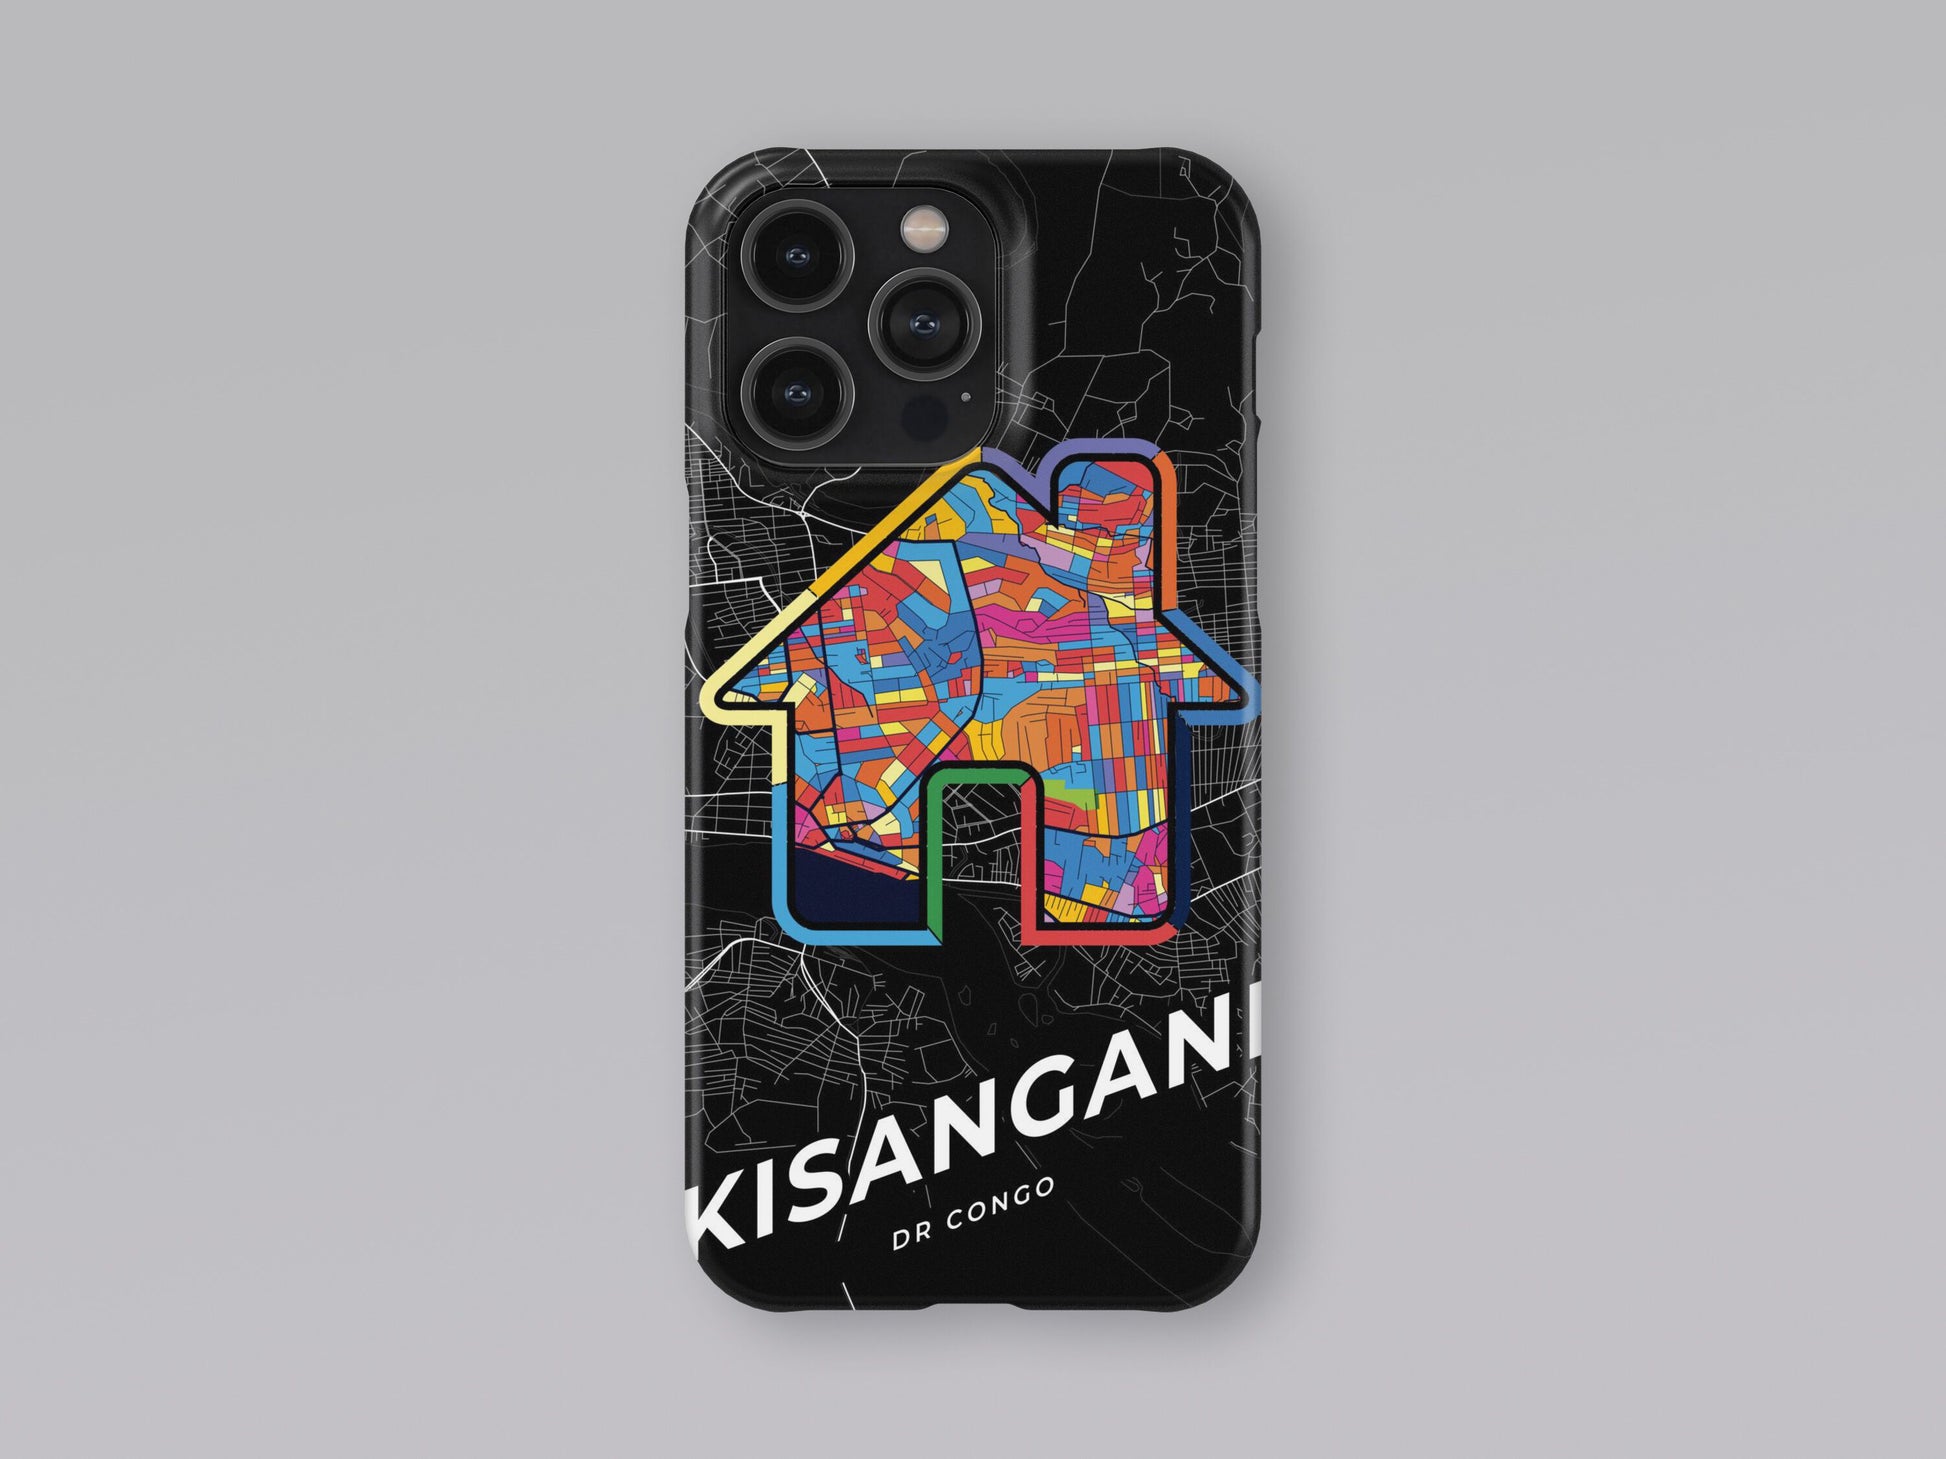 Kisangani Dr Congo slim phone case with colorful icon. Birthday, wedding or housewarming gift. Couple match cases. 3